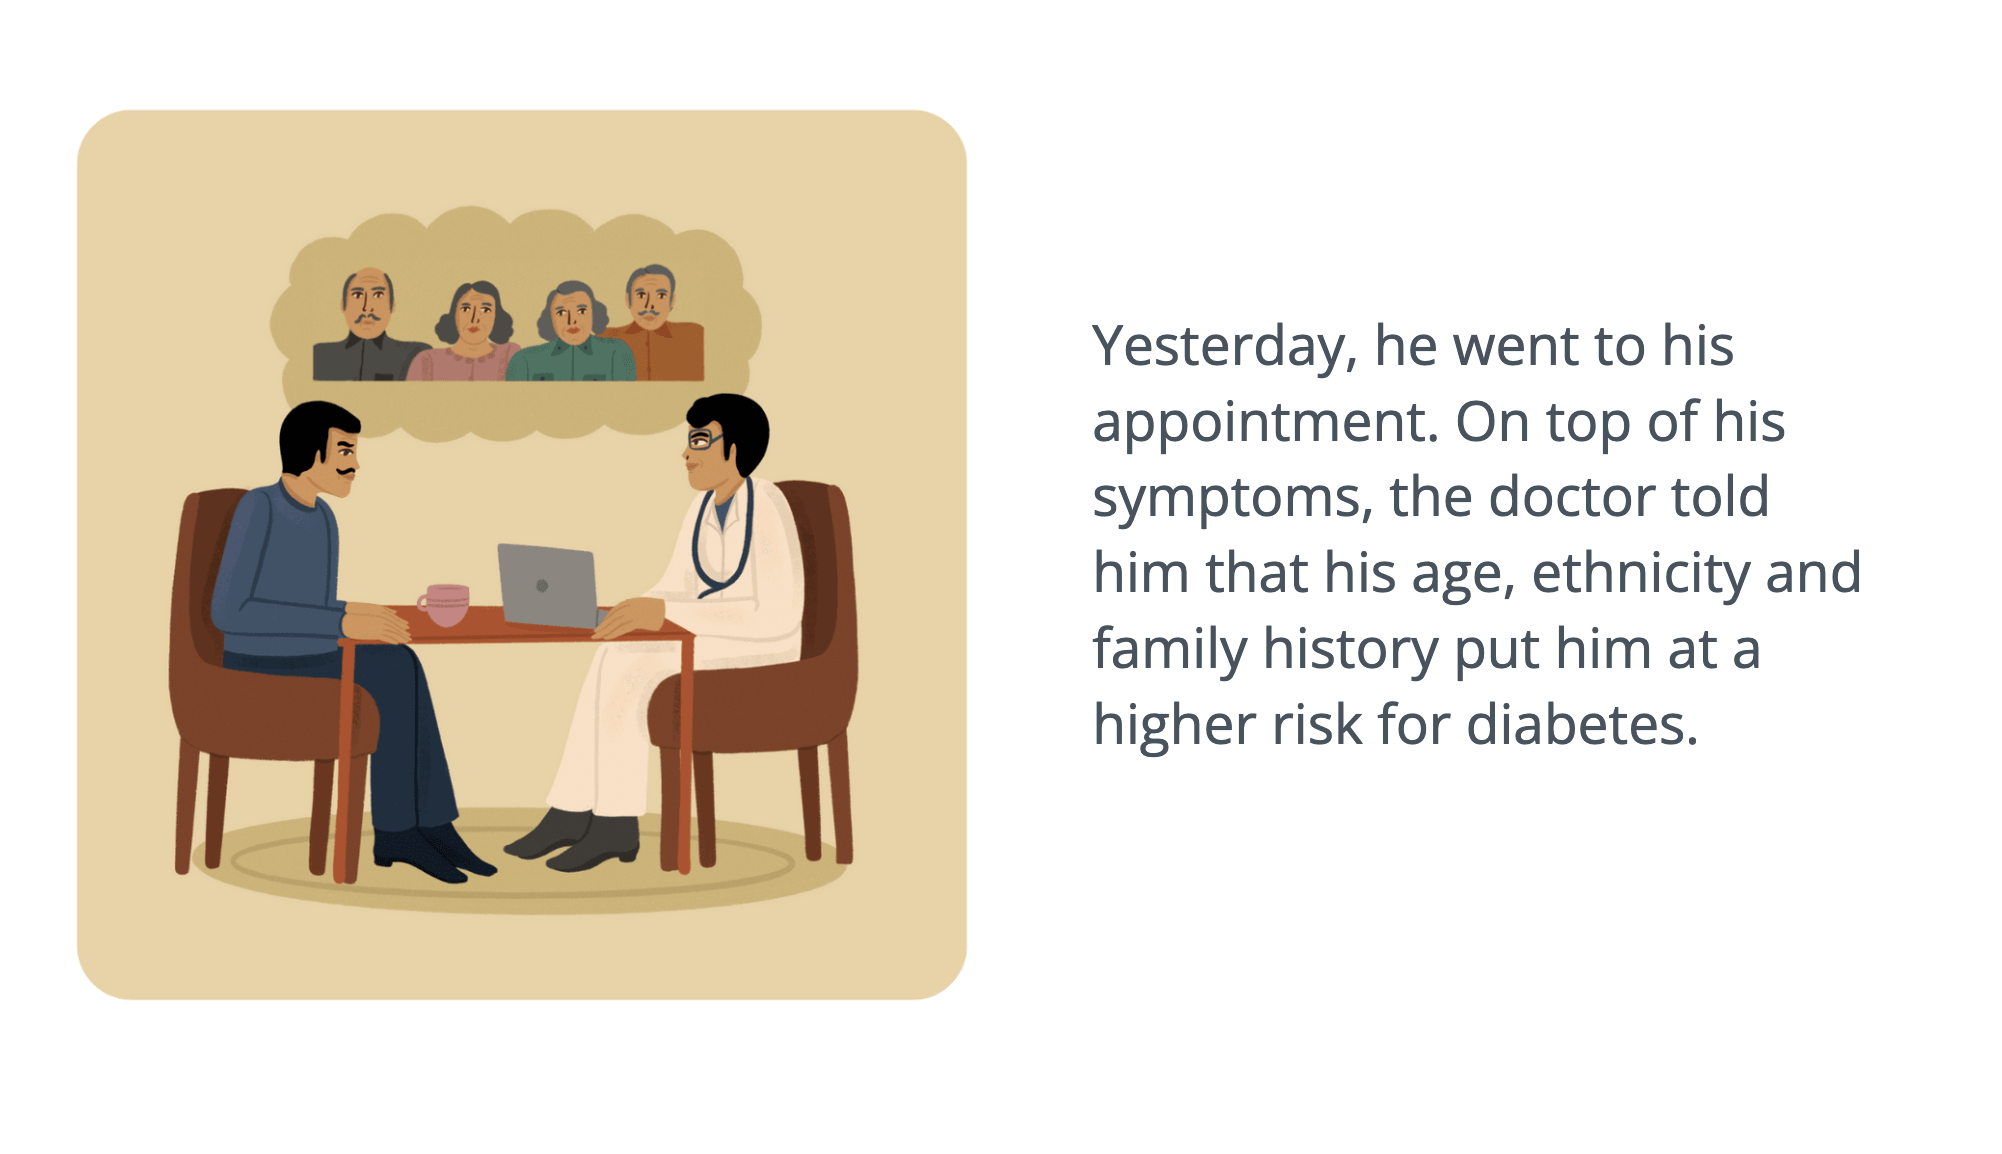 man sitting at table with doctor, thinking about family. card reads: "Yesterday, he went to his appointment. On top of his symptoms, the doctor told him that his age, ethnicity and family history put him at a higher risk for diabetes."